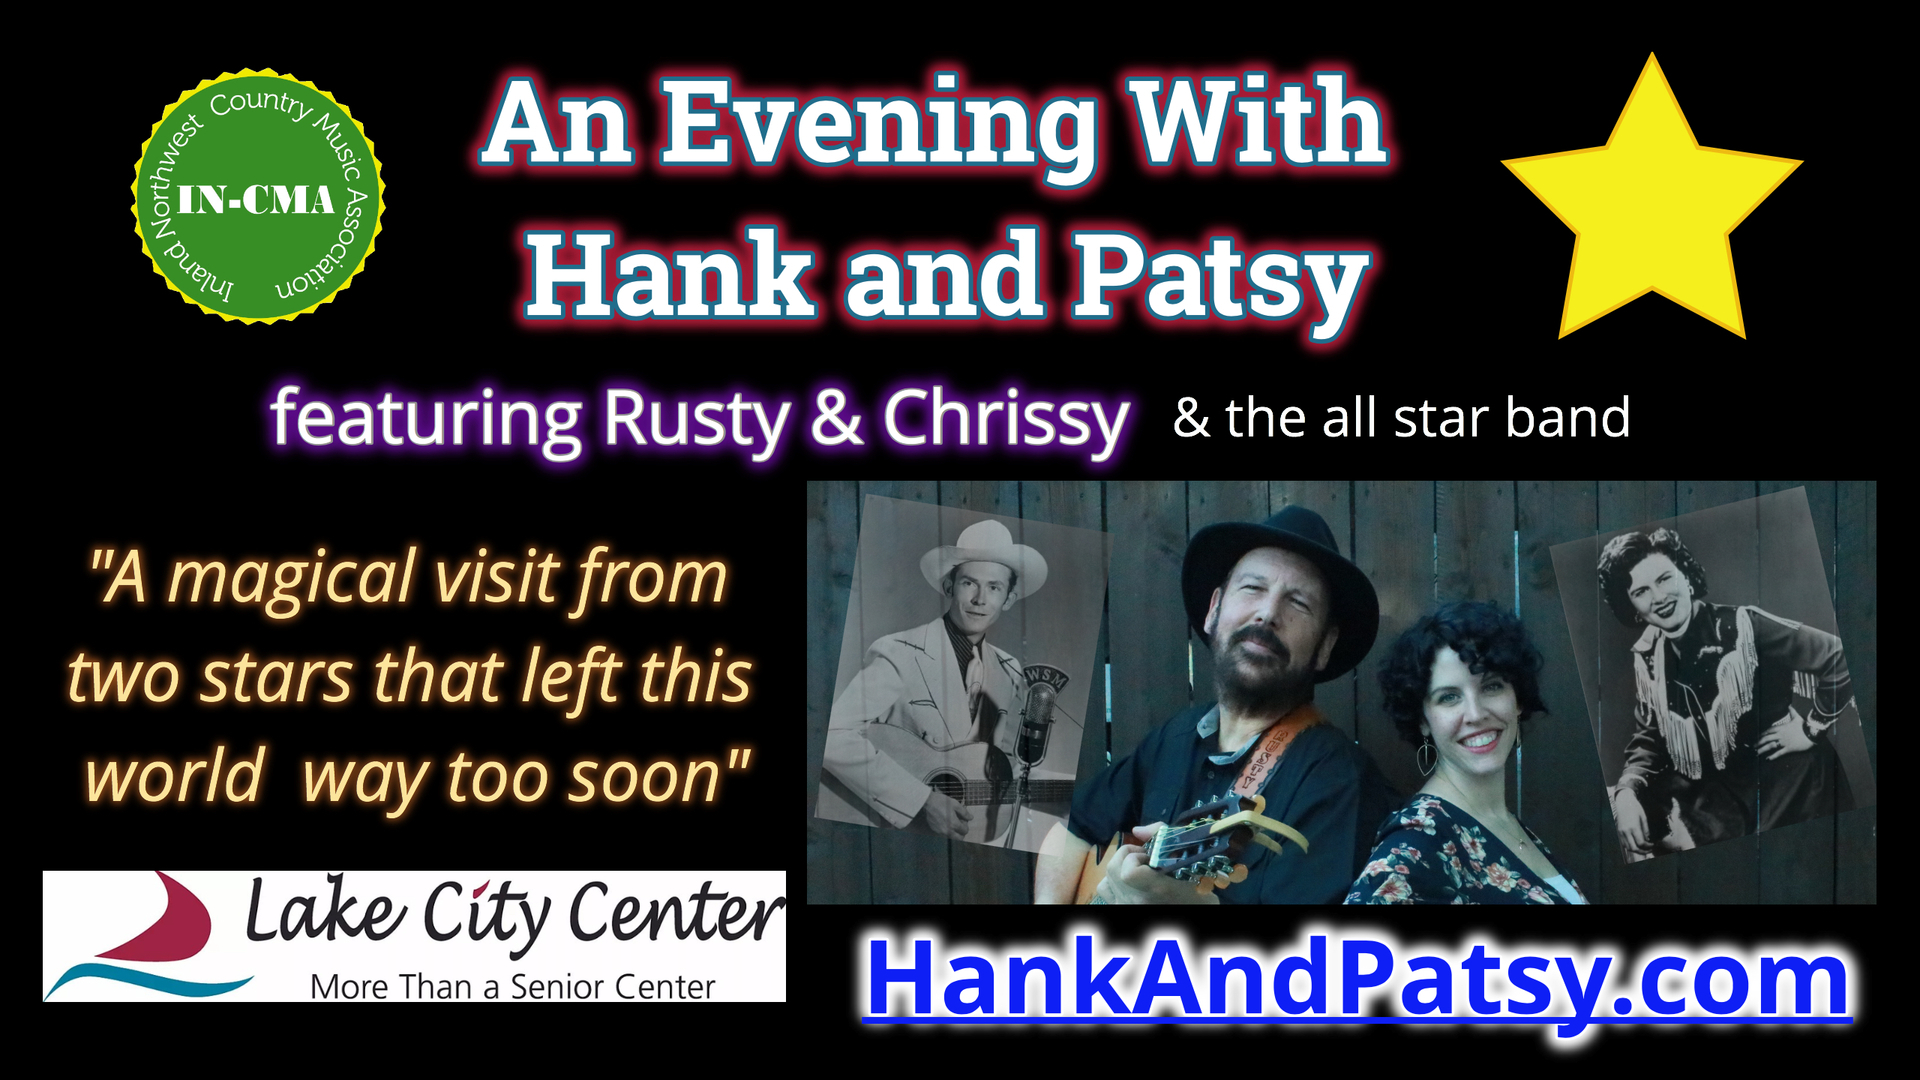 An Evening with Hank and Patsy, Coeur d'Alene, Idaho, United States